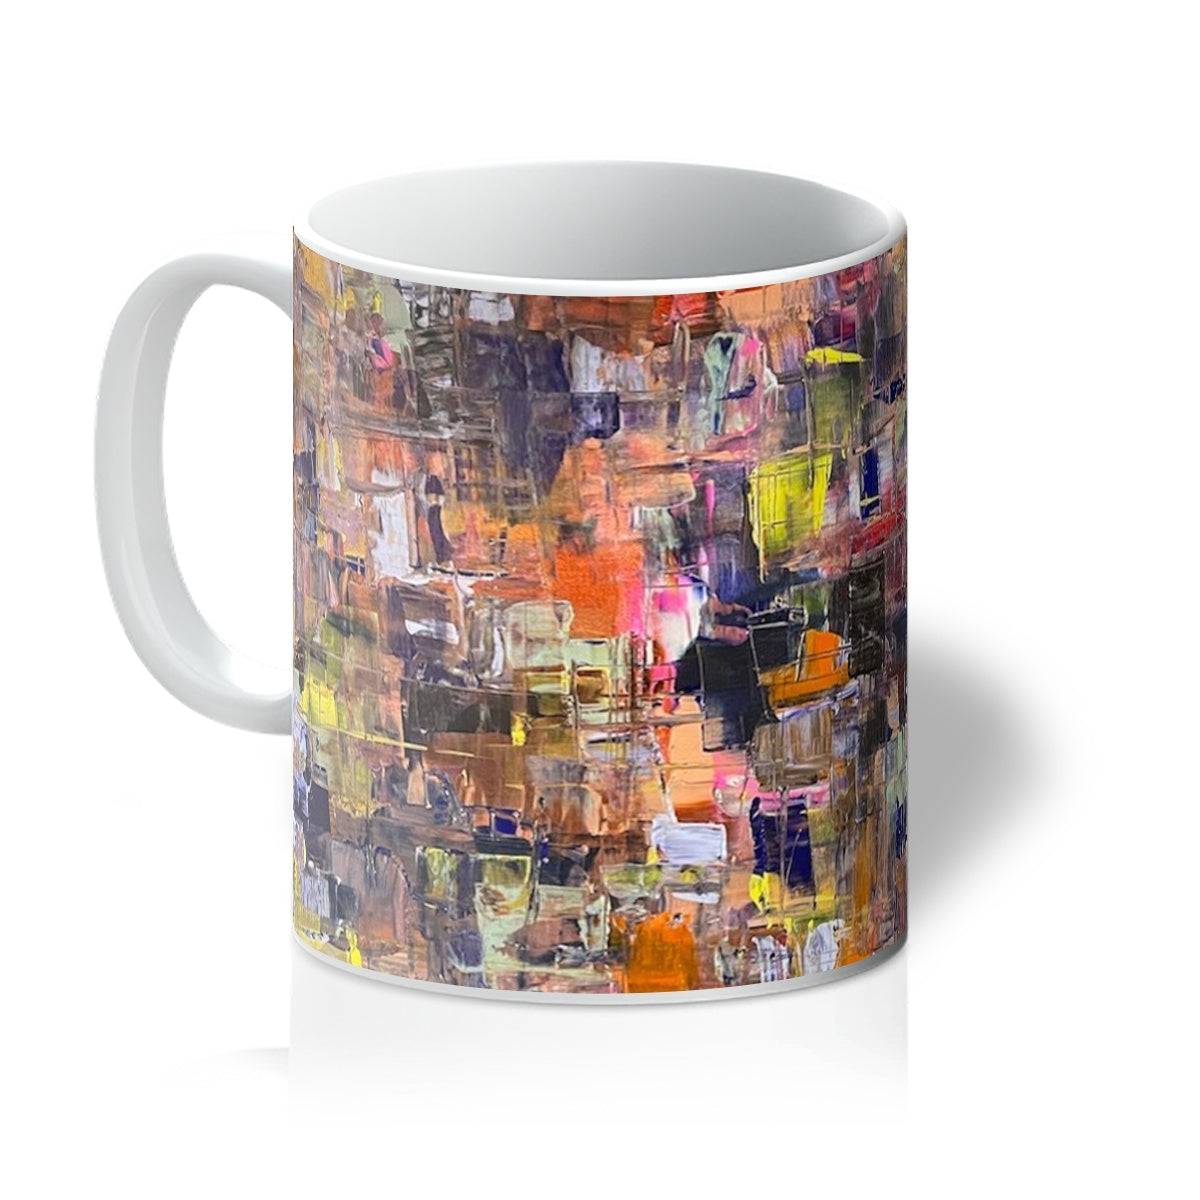 Never Enough Art Gifts Mug-Mugs-Abstract & Impressionistic Art Gallery-11oz-White-Paintings, Prints, Homeware, Art Gifts From Scotland By Scottish Artist Kevin Hunter